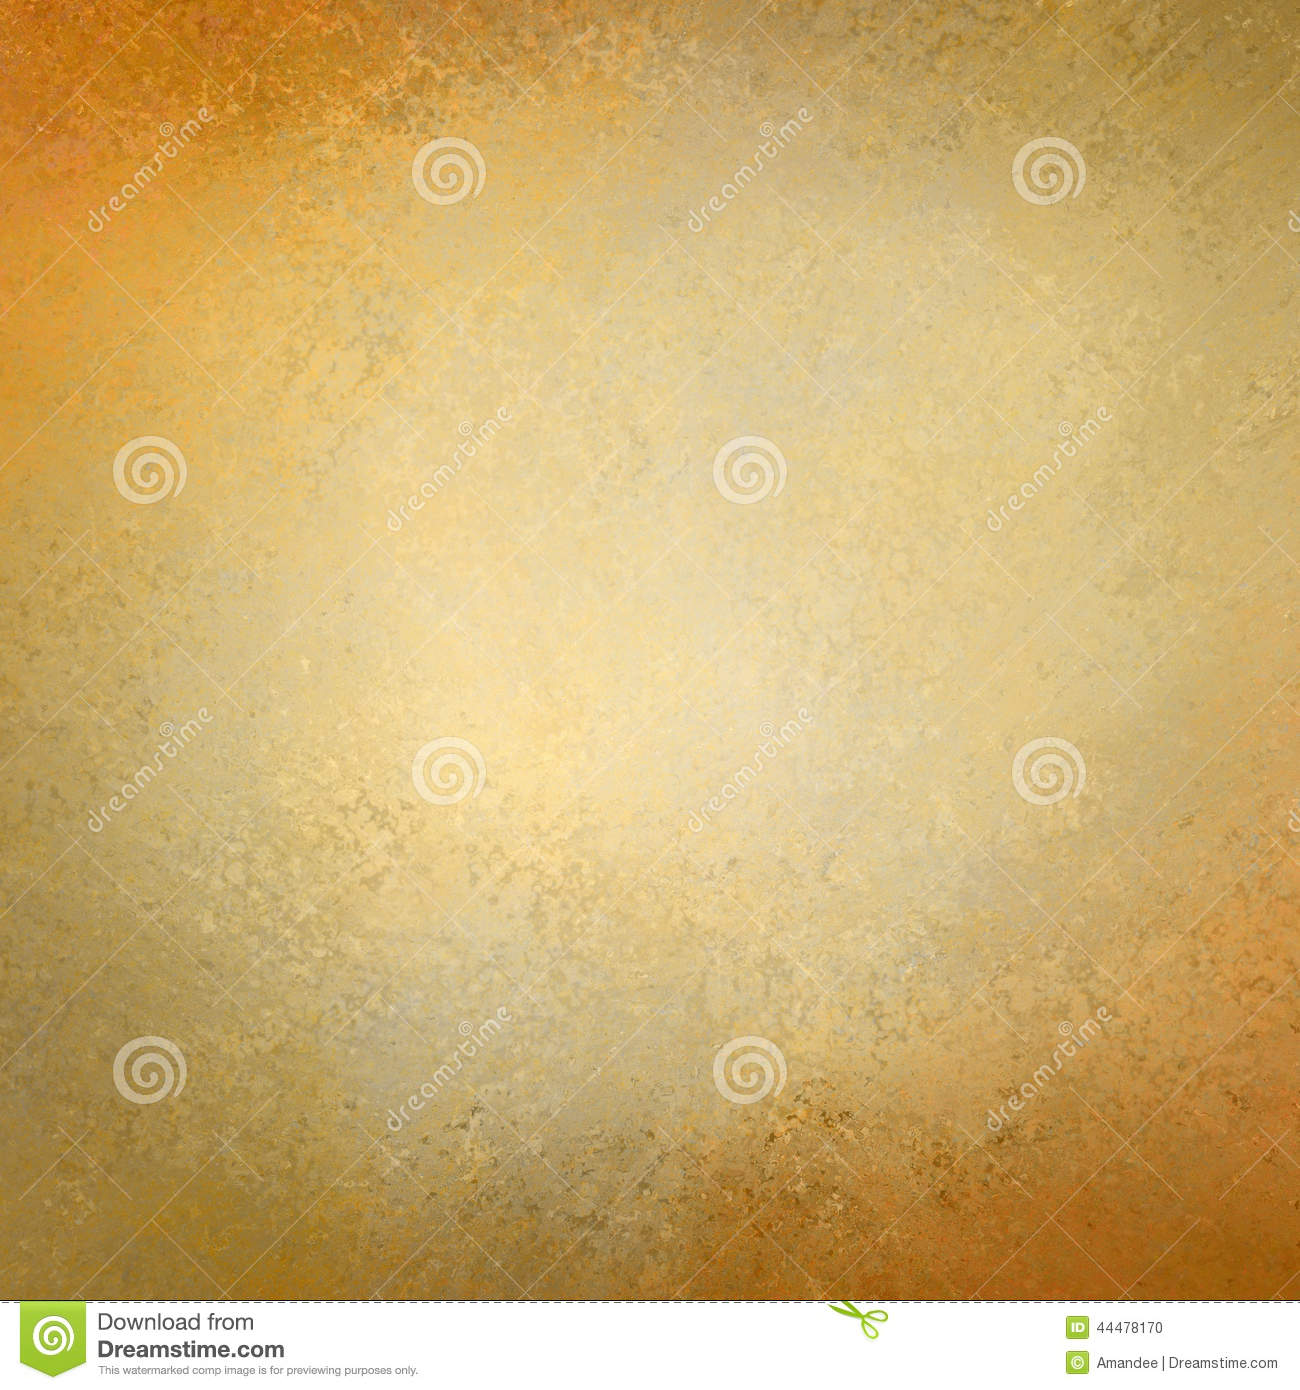 Solid Gold Background Paper With Vintage Grunge Texture Design Stock